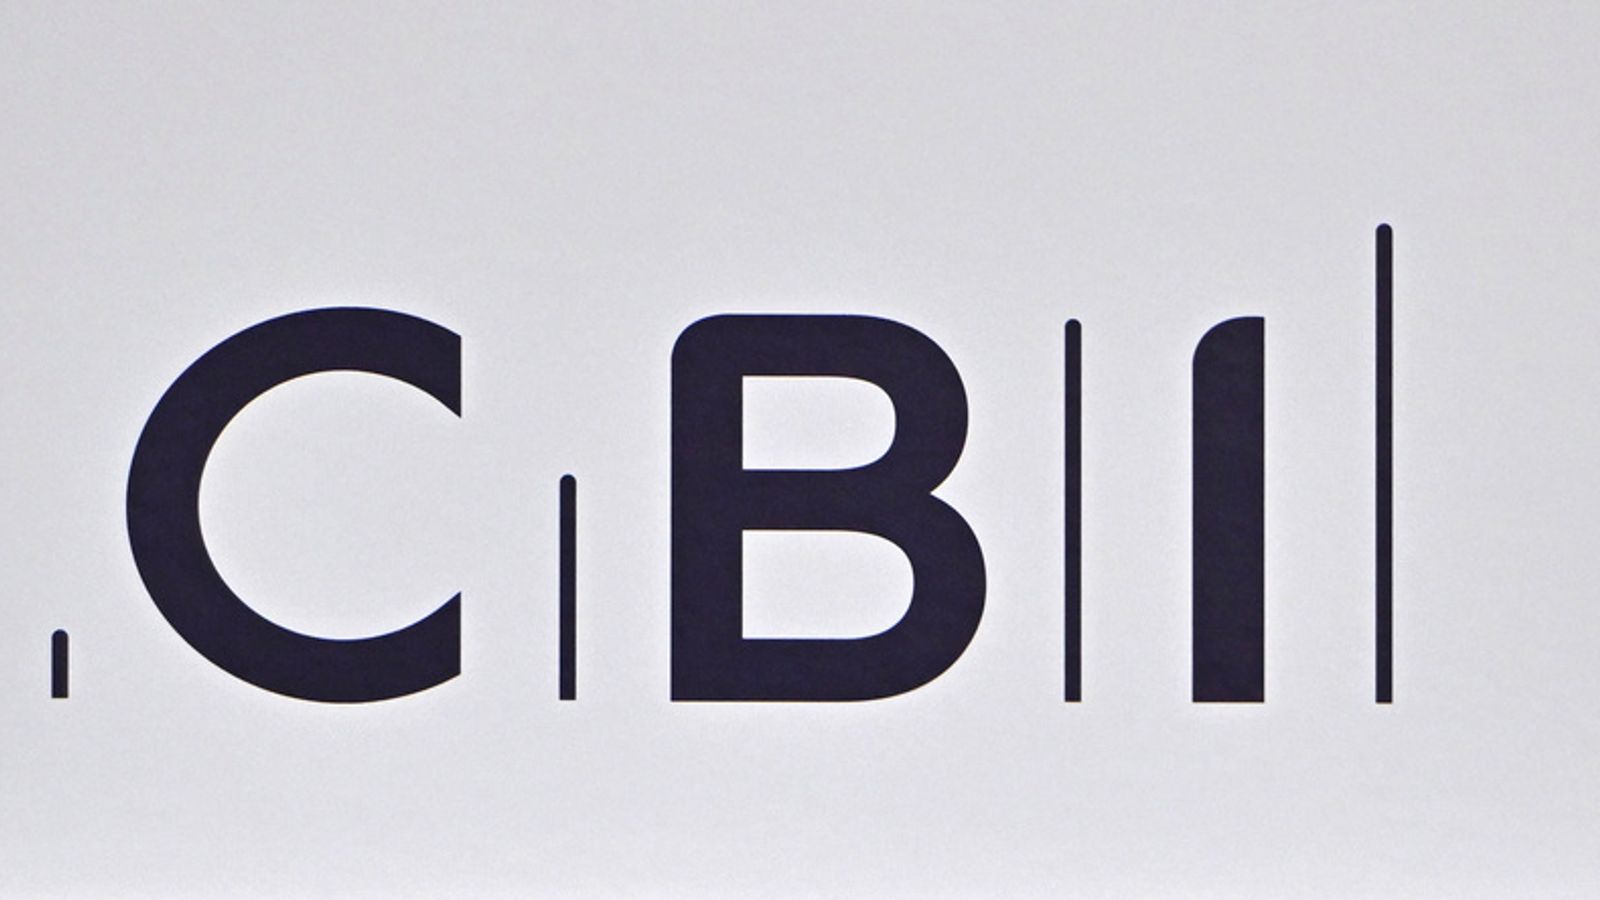 Crisis-hit CBI business group faces new cash crunch amid talks with rival